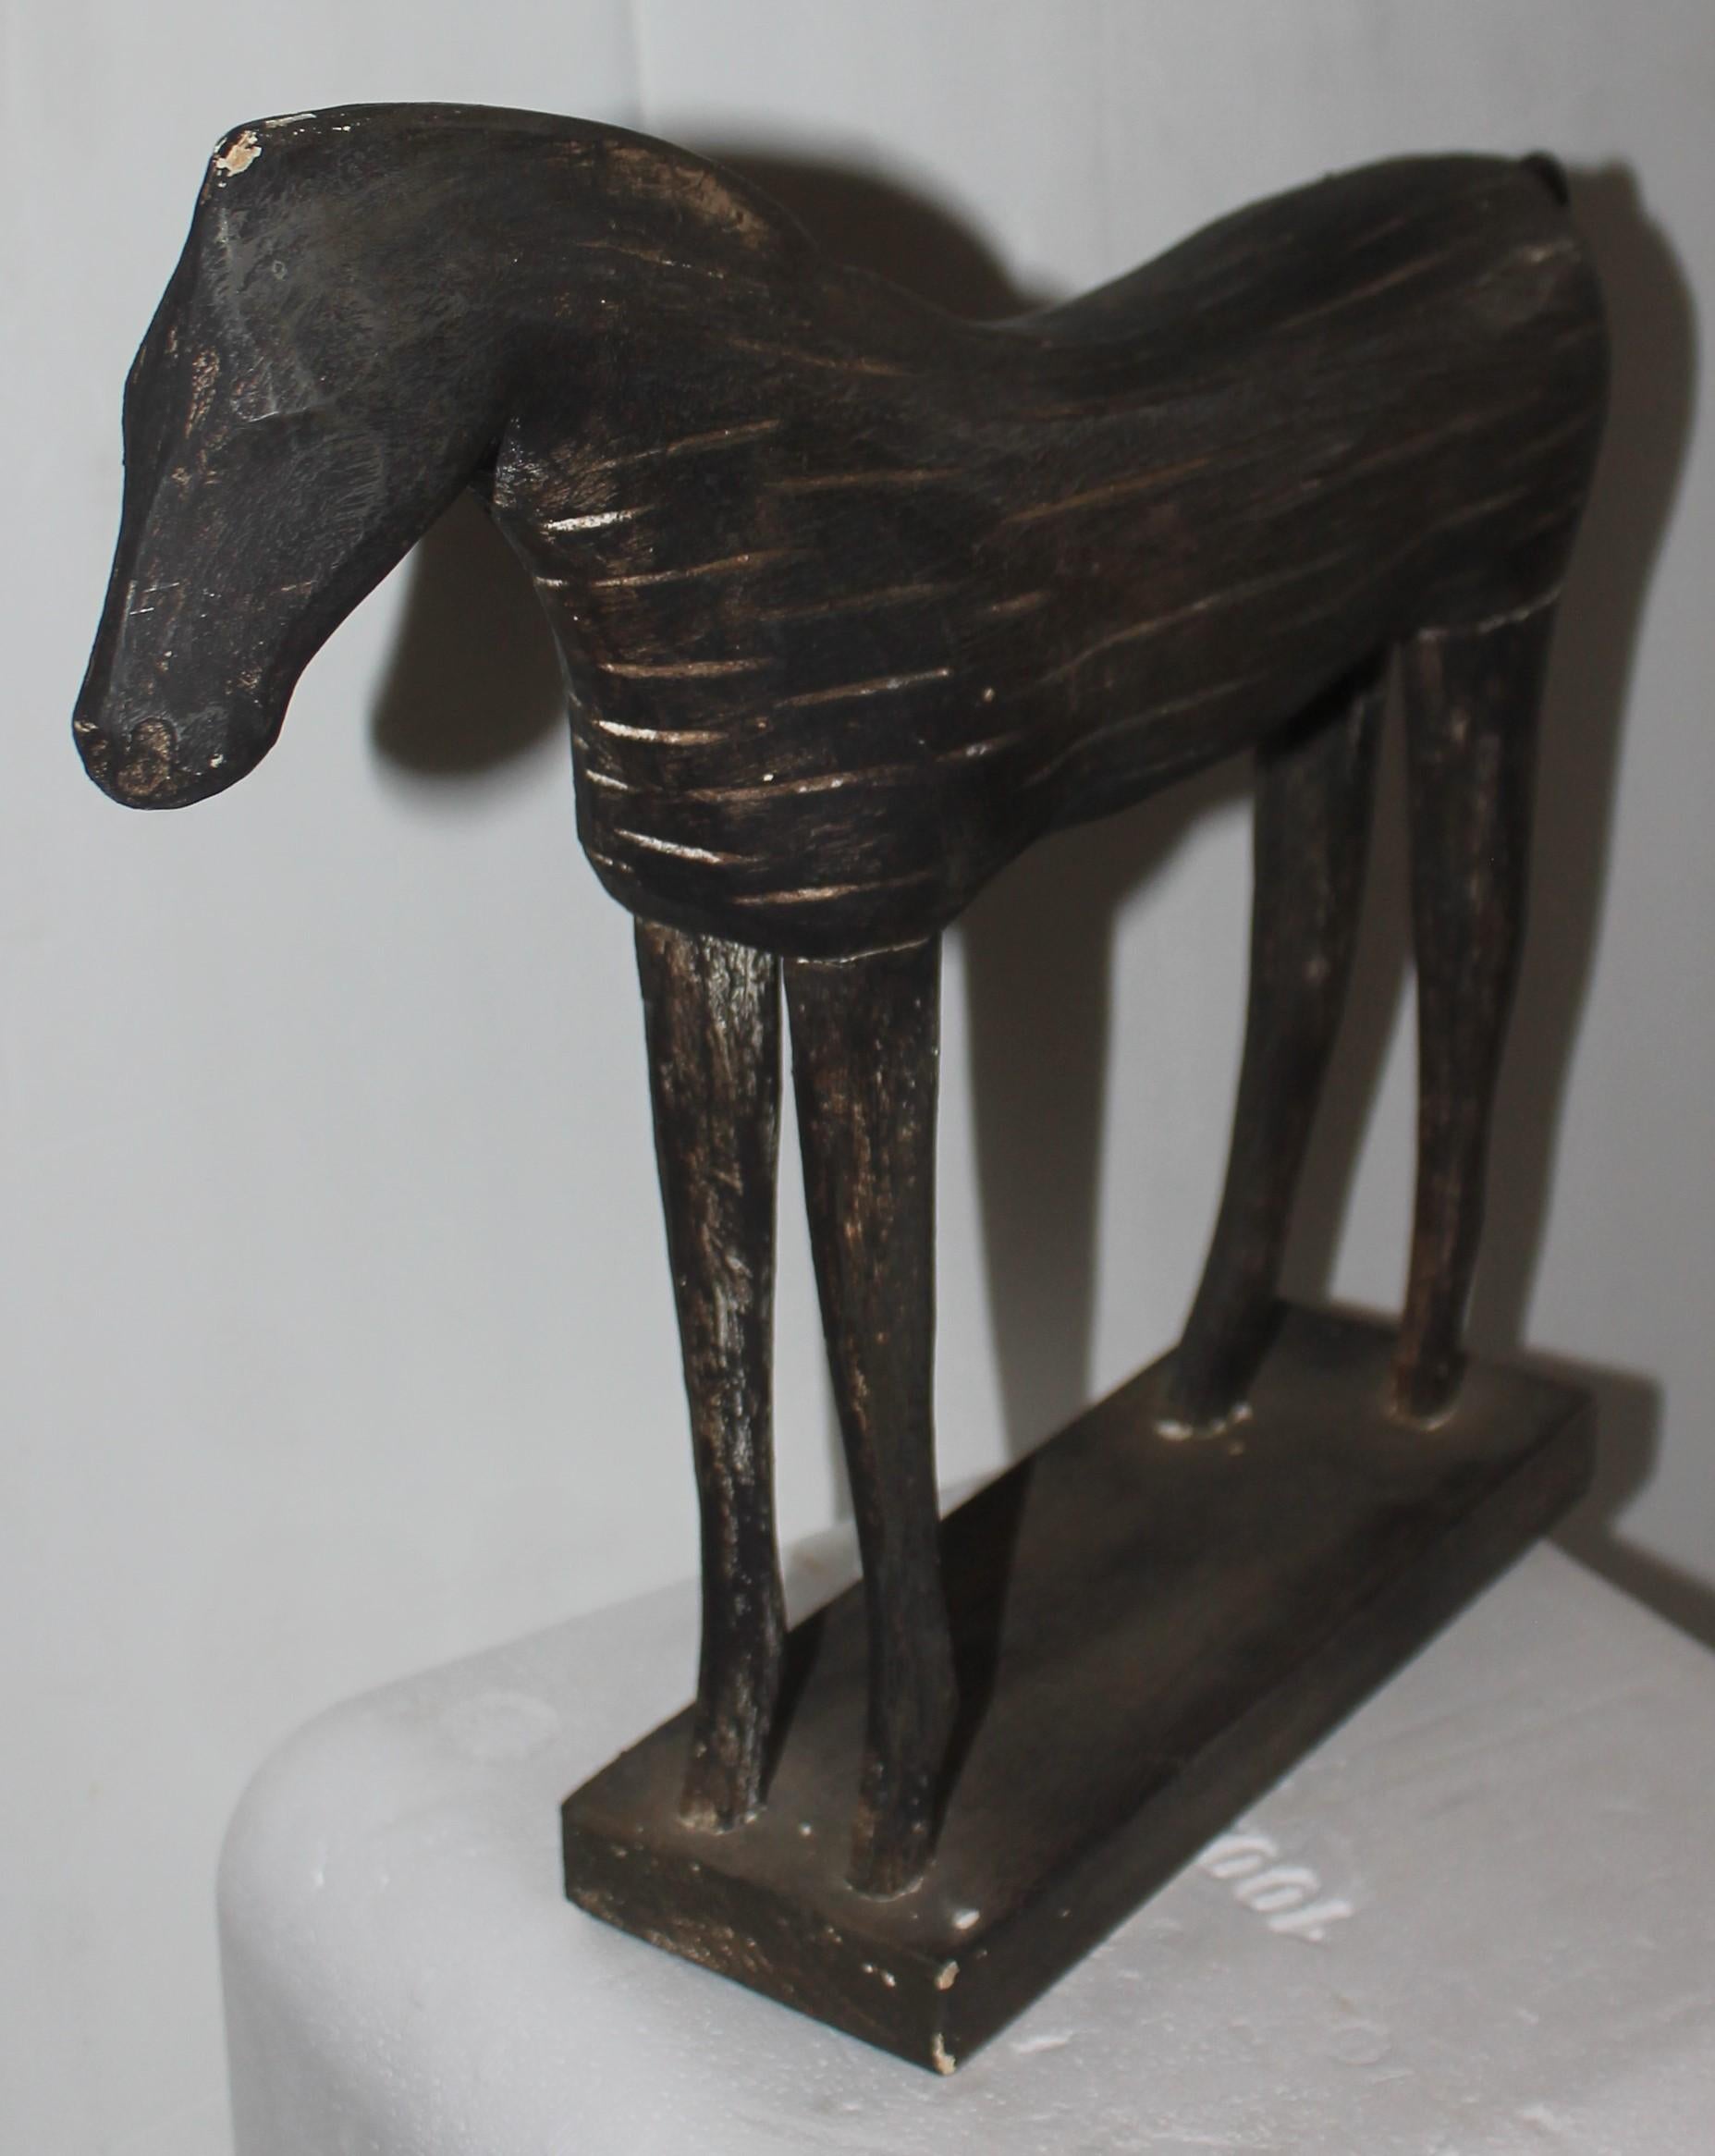 This fun & folky 20thc hand carved and painted horse is carved out of wood. It has a wonderful aged patina but is a later version of a earlier horse.